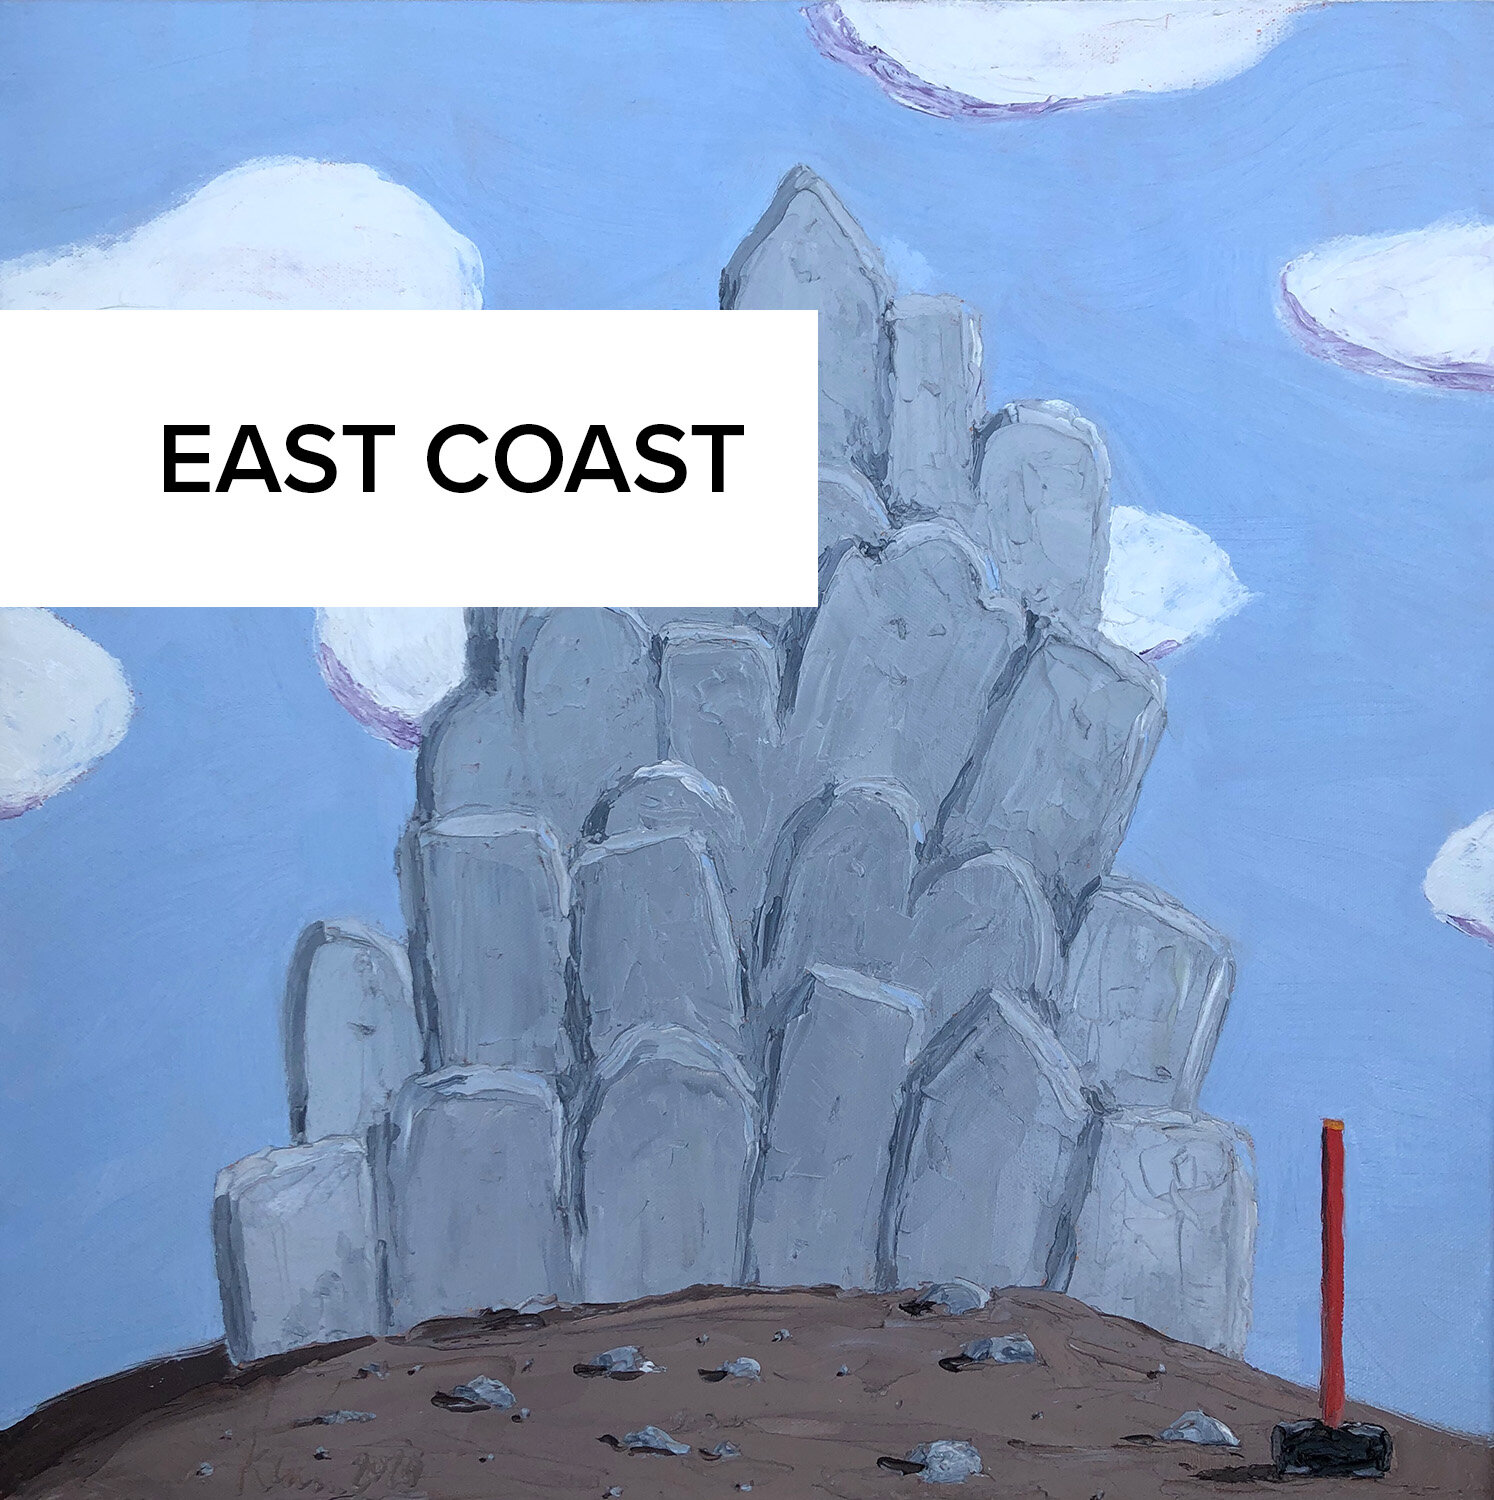 Click this image to see the East Coast show